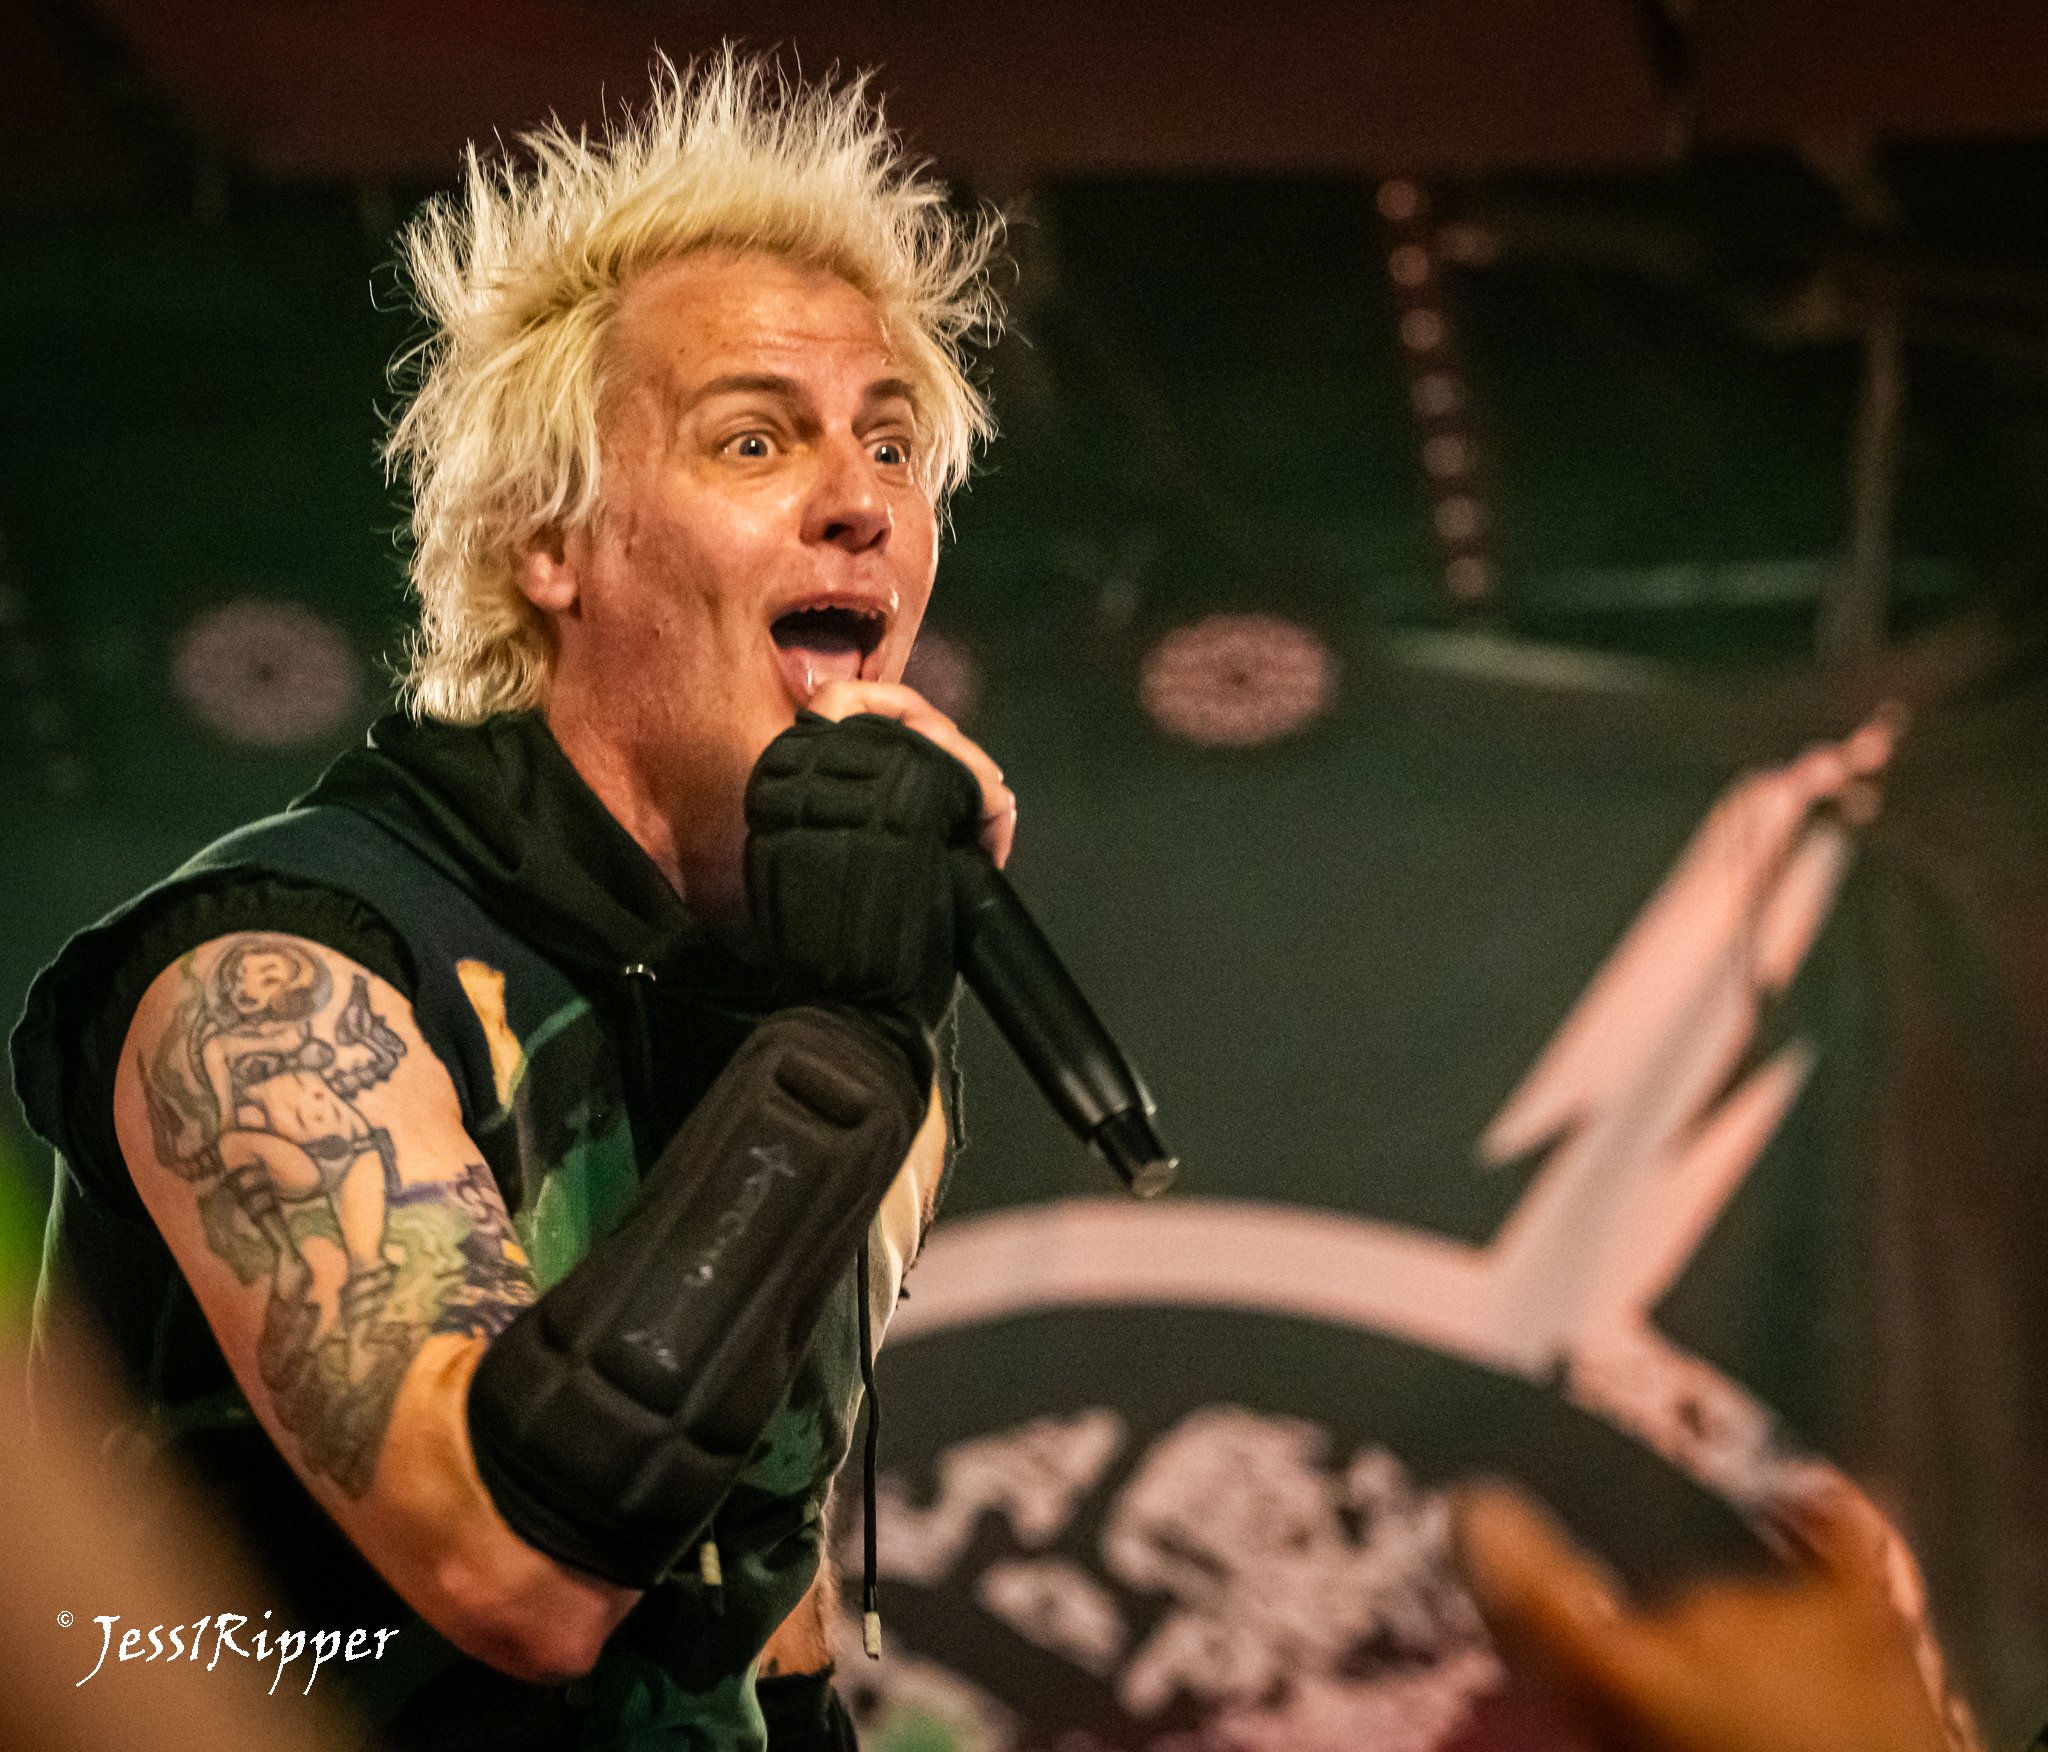 Photos: Powerman 5000, September Mourning, The Great Alone at Lovedraft’s in Mechanicsburg, Pennsylvania on March 17, 2024